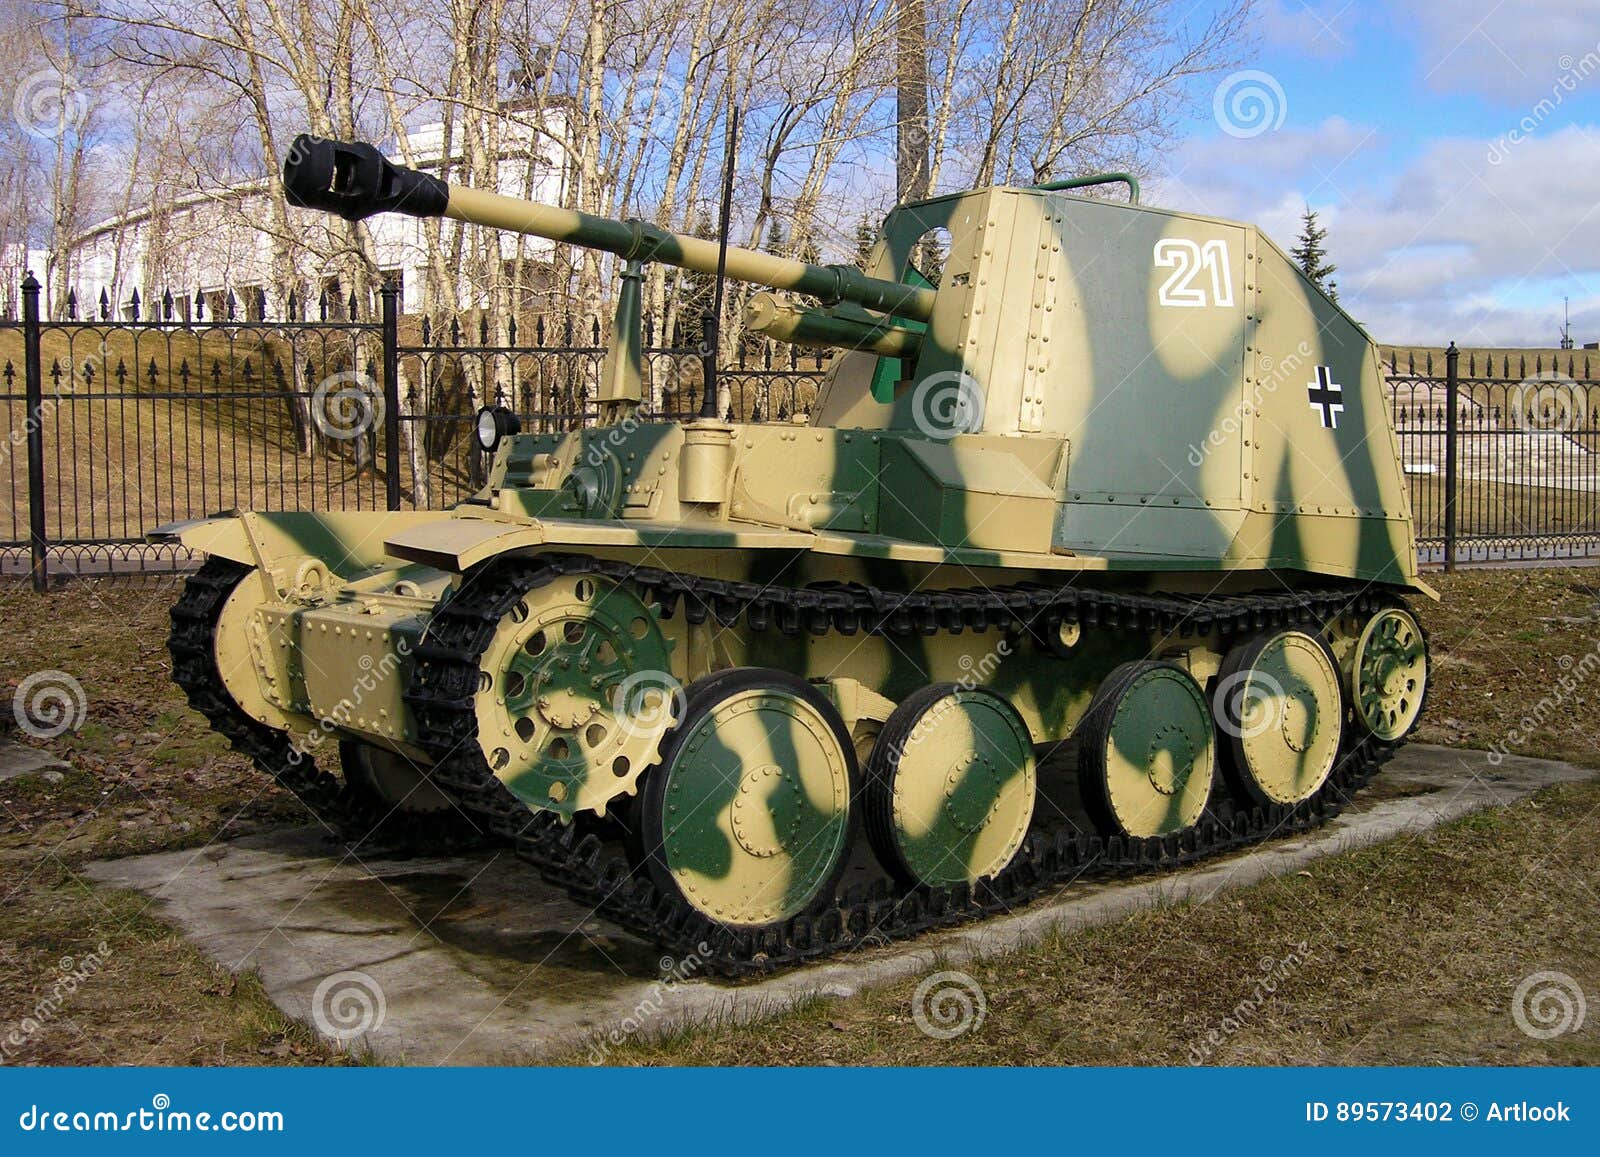 https://thumbs.dreamstime.com/z/mm-m-marder-self-propelled-anti-tank-gun-germany-moscow-russia-weaponry-fortification-exposition-victory-park-89573402.jpg